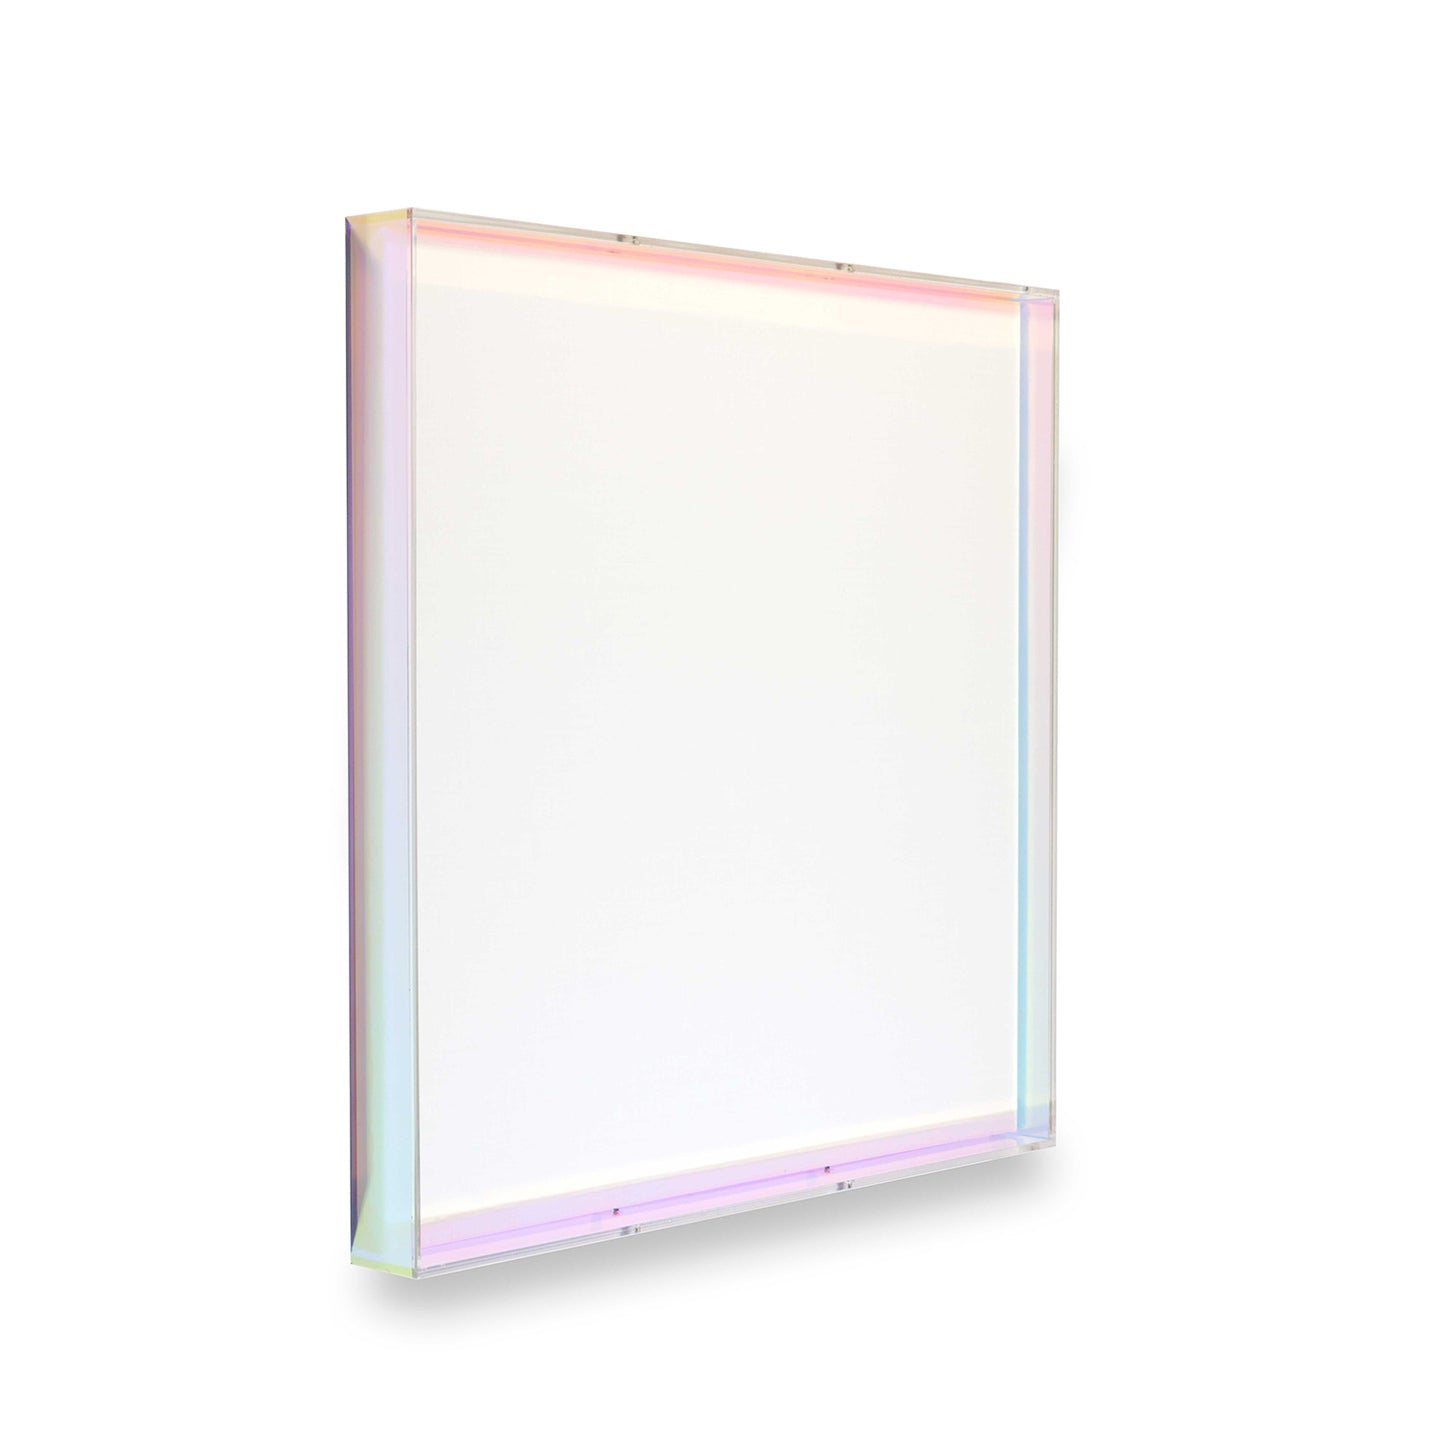 Case Pack of Rainbow Acrylic Shadowbox with White Canvas